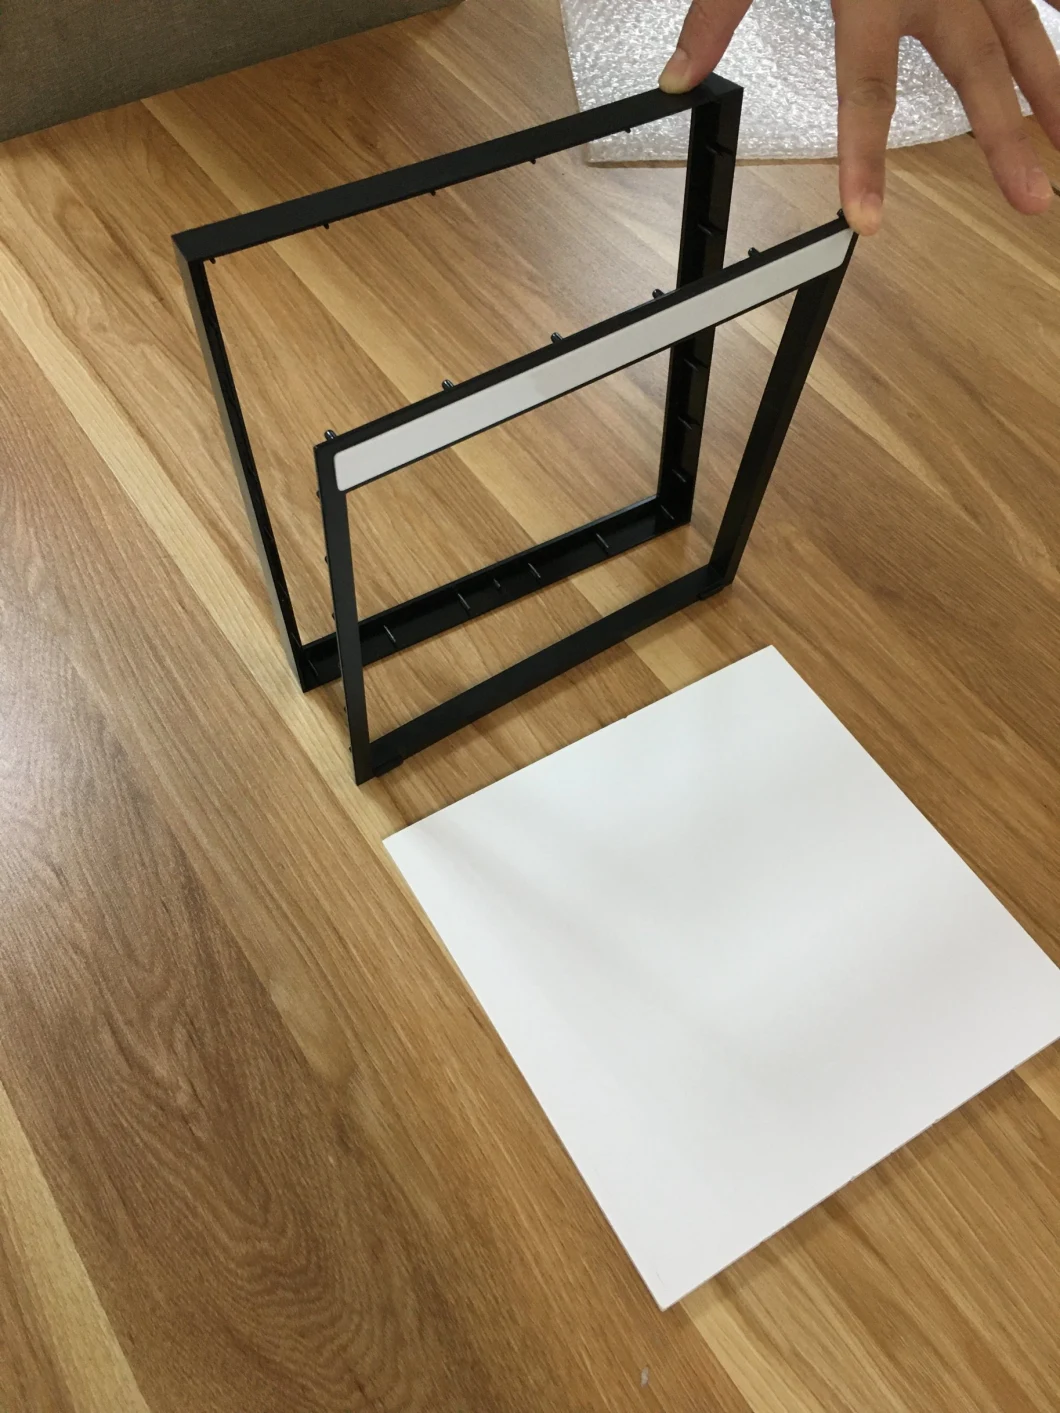 New Designed Removable Plastic Picture Frame for Photo Mounting